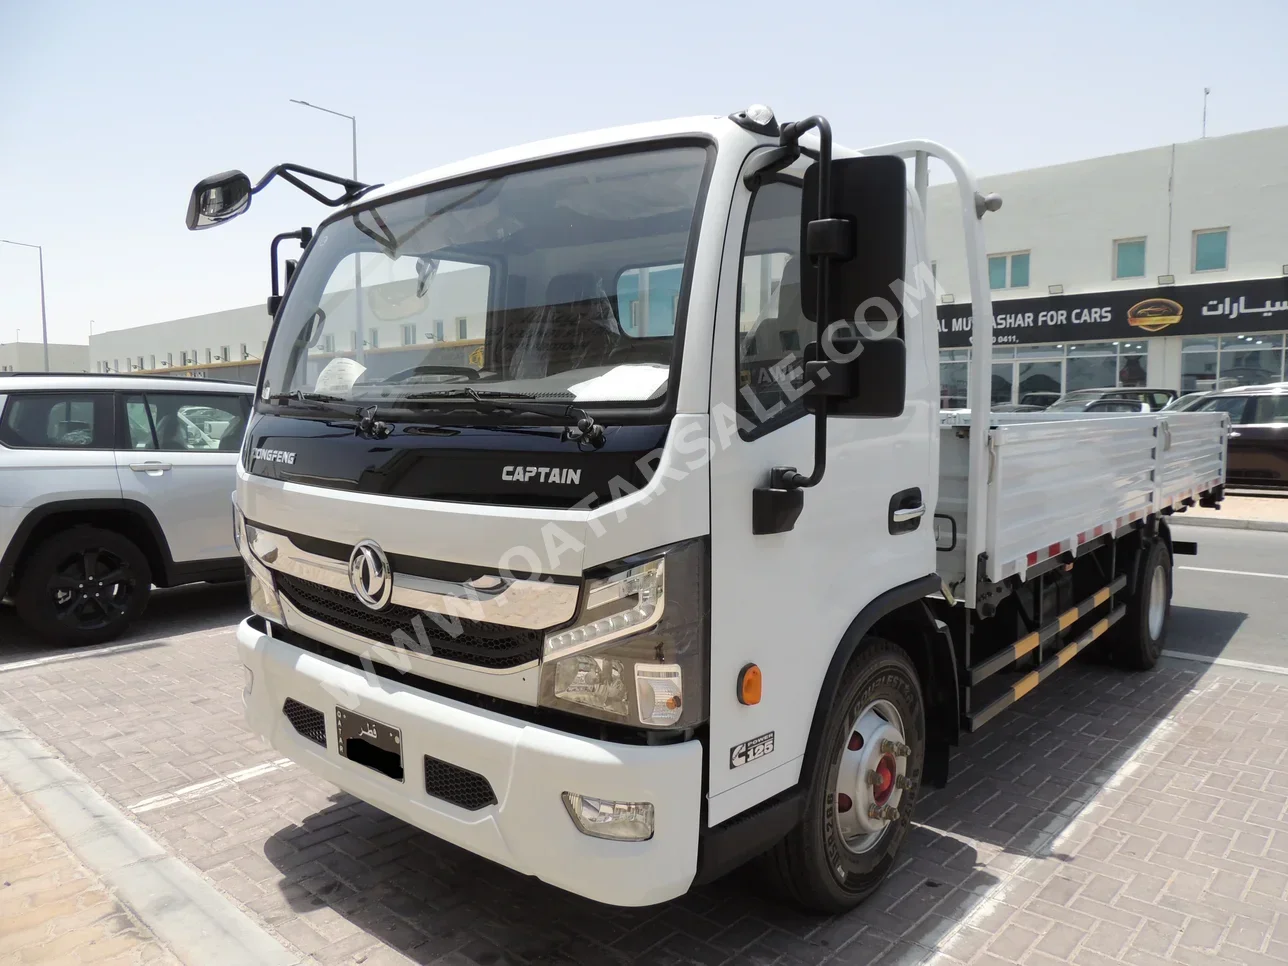 Dongfeng  Captain - C  2022  Manual  0 Km  4 Cylinder  All Wheel Drive (AWD)  Van / Bus  White  With Warranty